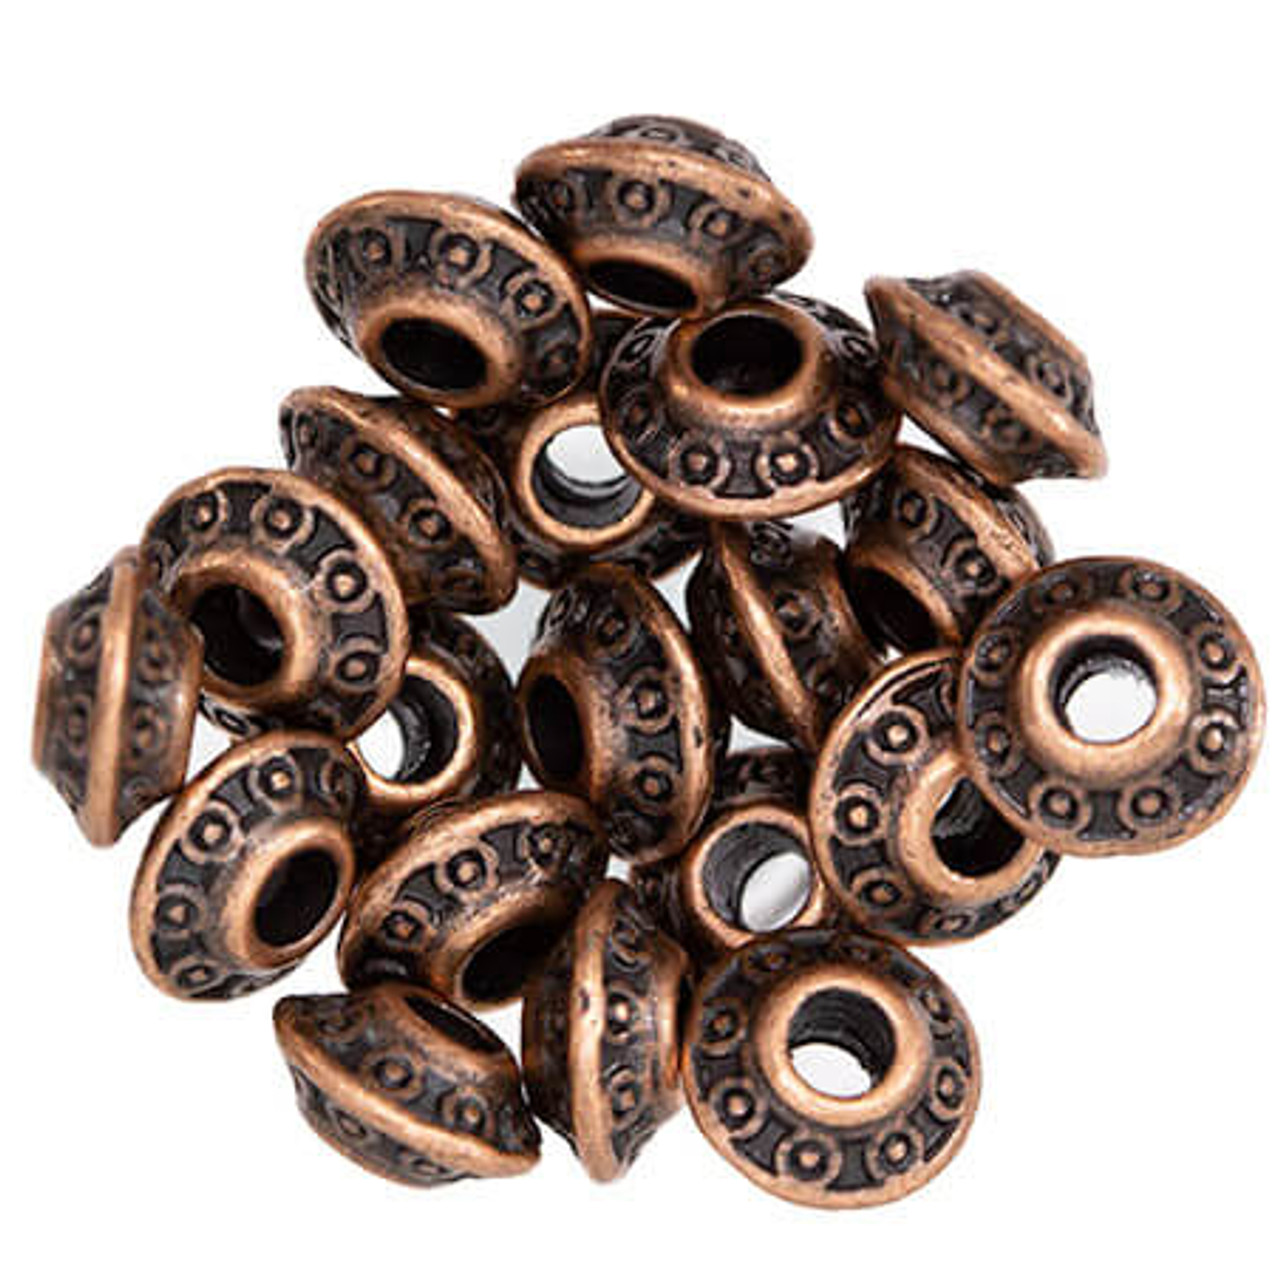 Antique Copper Beads for Jewelry Making Spacer Beads & Bead Assortments for  Bracelet Necklace Earring Making Copper Craft Supplies Beads Copper